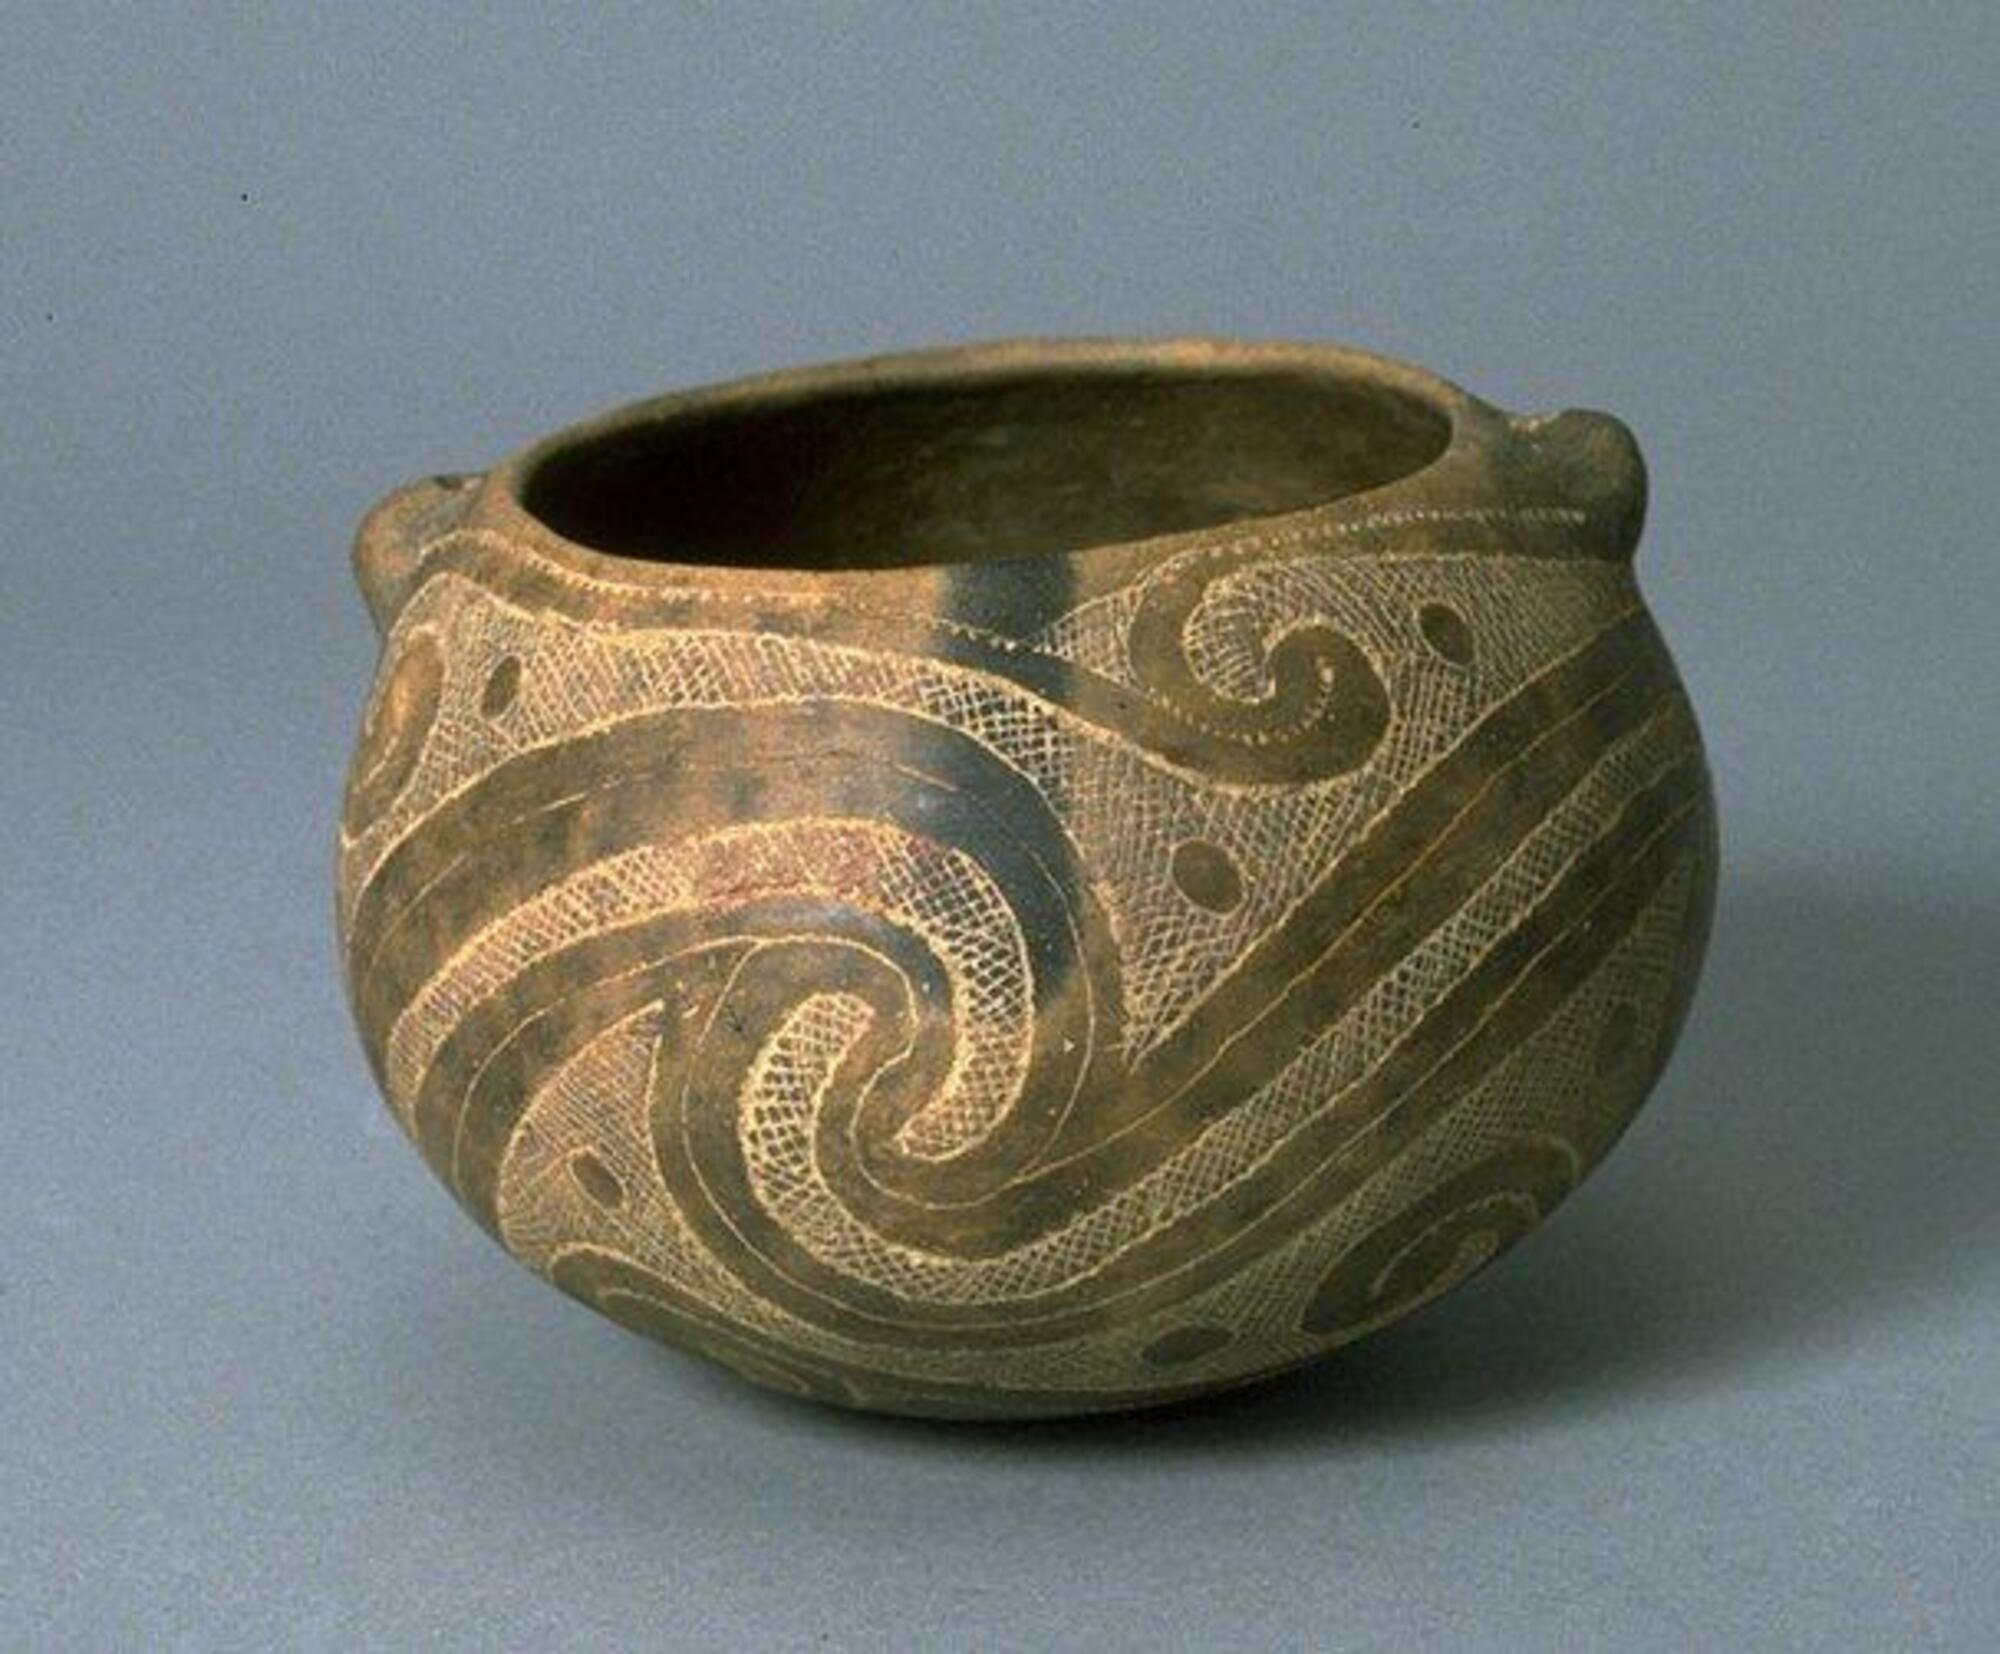 Bulbous bowl in dark and light browns on the outside, black interior. Patterns of scrolls, circles, and dots around the exterior.